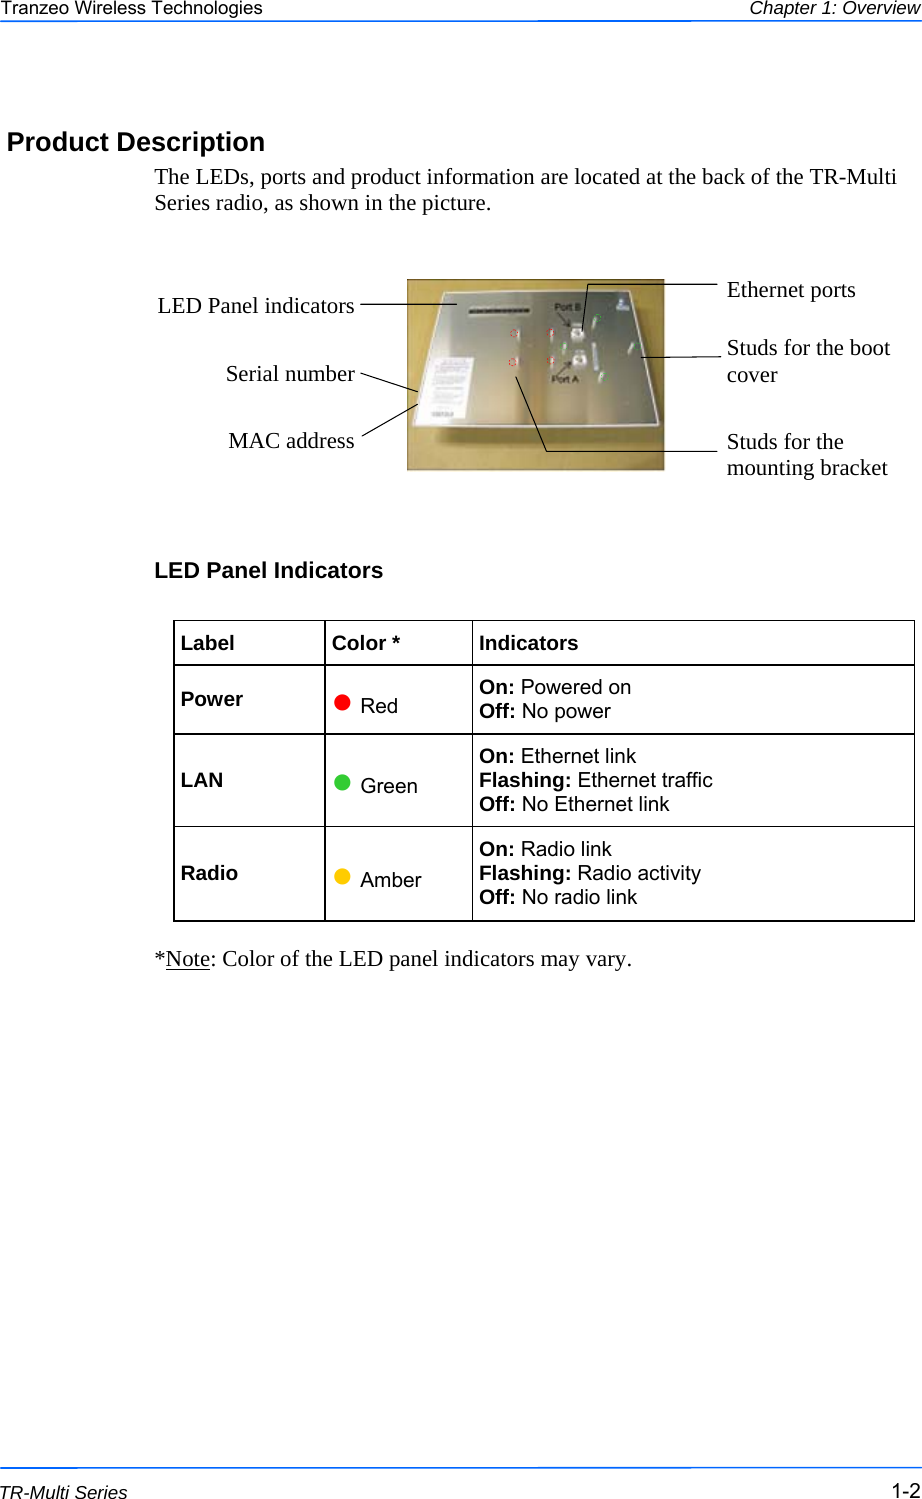  222 This document is intended for Public Distribution                         19473 Fraser Way, Pitt Meadows, B.C. Canada V3Y  2V4 Chapter 1: Overview 1-2 TR-Multi Series Tranzeo Wireless Technologies Product Description The LEDs, ports and product information are located at the back of the TR-Multi Series radio, as shown in the picture.              LED Panel Indicators      *Note: Color of the LED panel indicators may vary. Label  Color *  Indicators Power  ● Red  On: Powered on Off: No power LAN  ● Green On: Ethernet link Flashing: Ethernet traffic Off: No Ethernet link Radio  ● Amber On: Radio link Flashing: Radio activity Off: No radio link LED Panel indicators MAC address  Ethernet ports Serial number  Studs for the boot cover Studs for the mounting bracket  